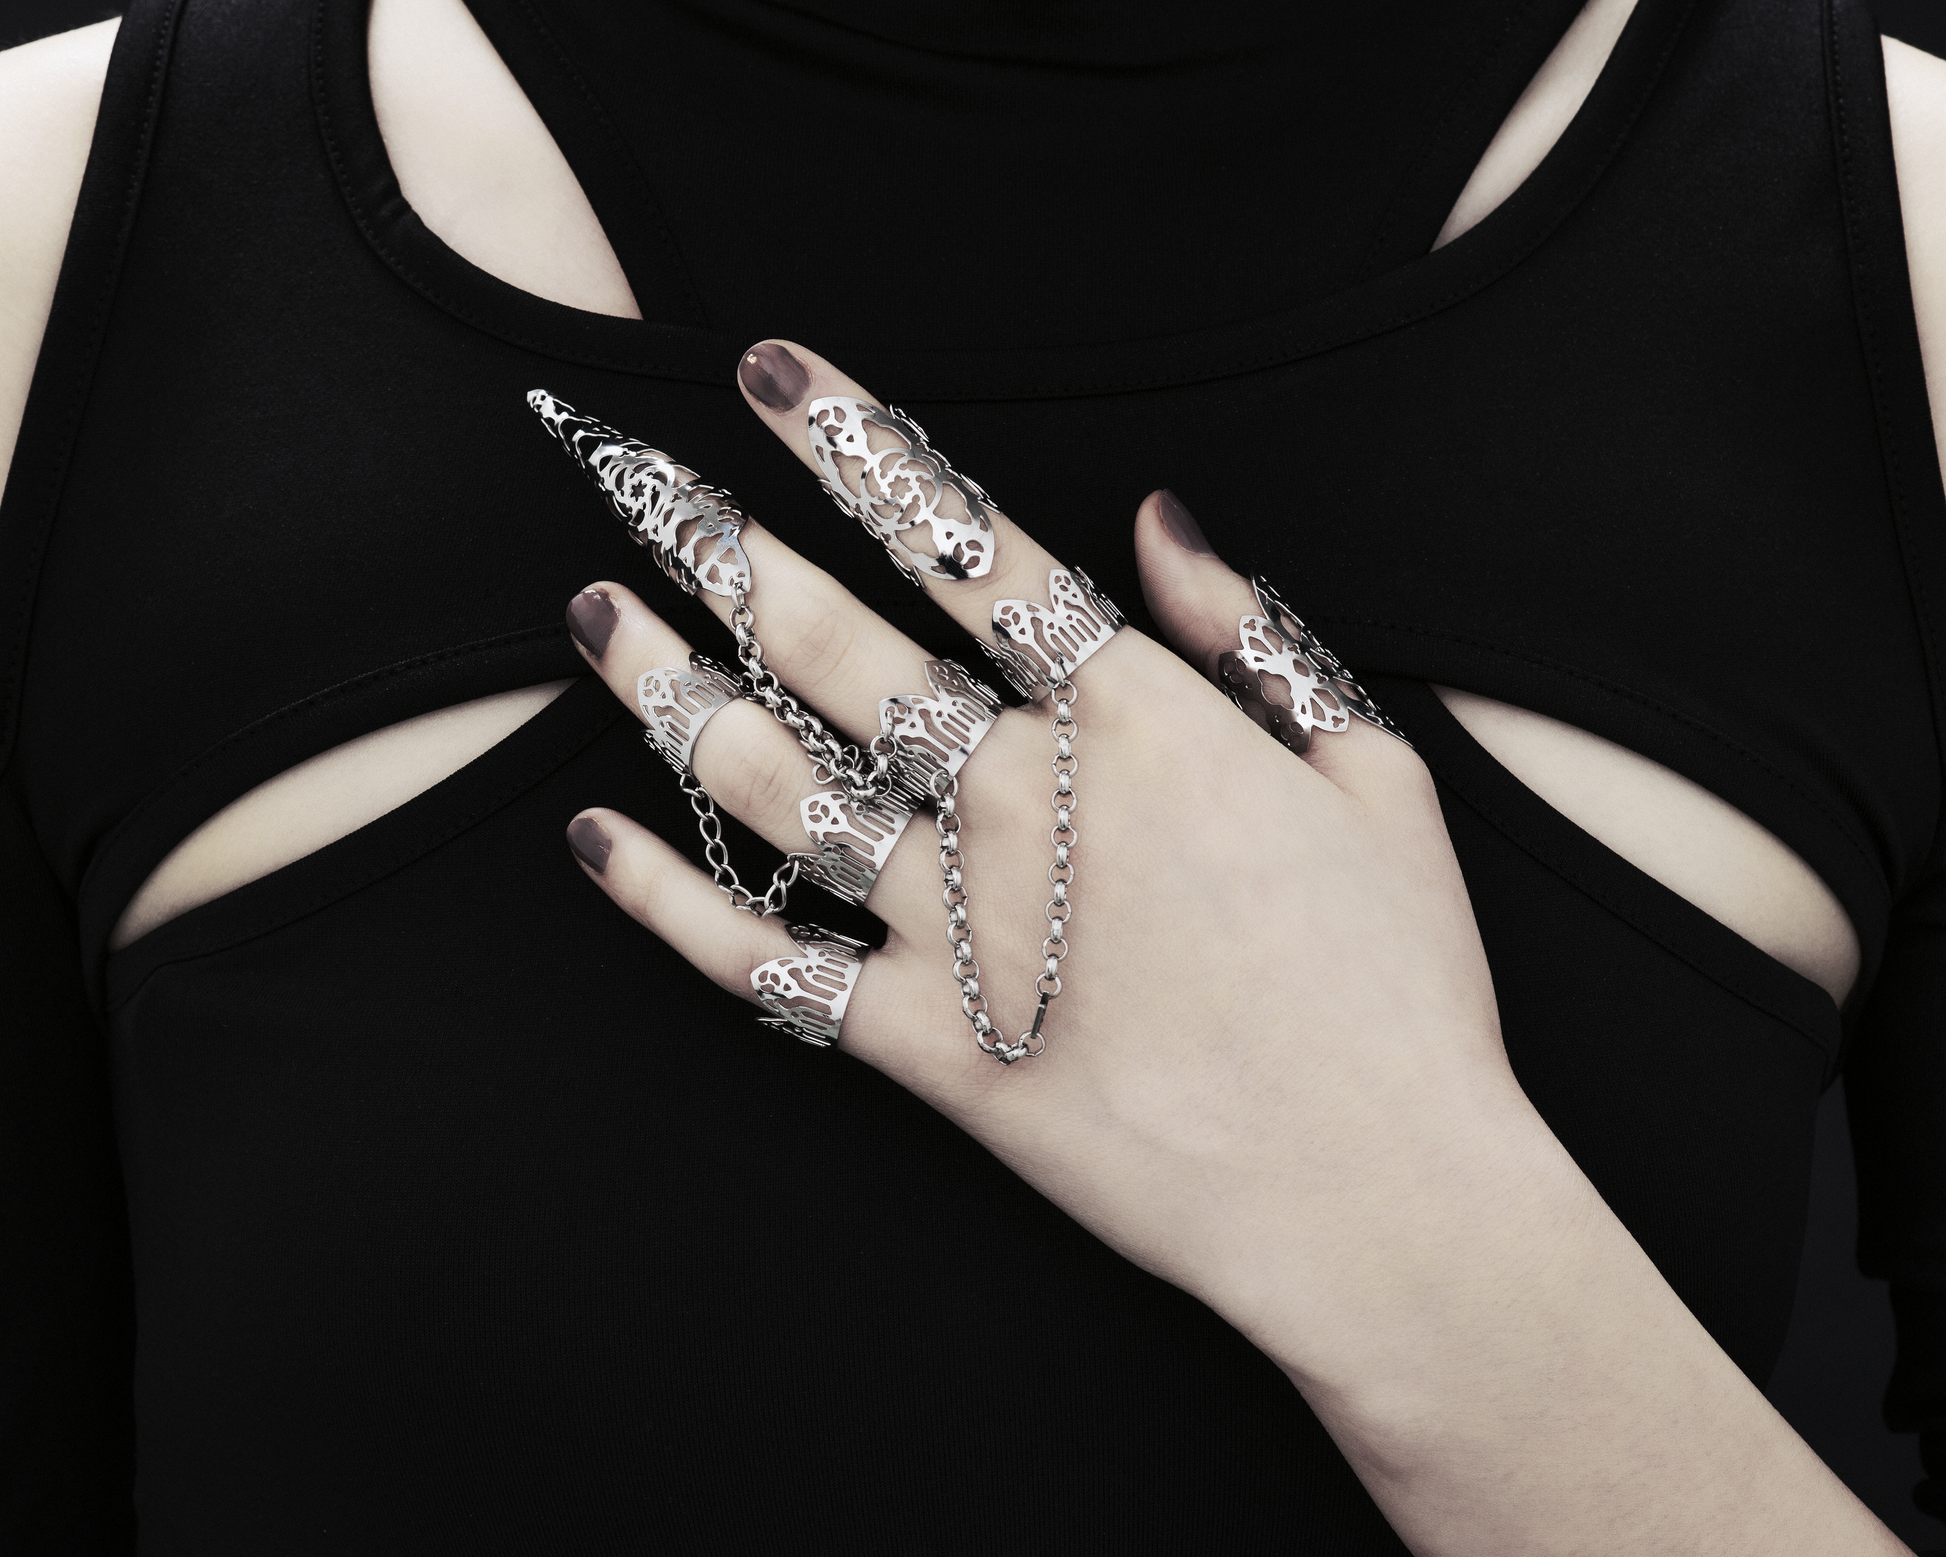 A hand models an array of Myril Jewels' handcrafted rings, each piece featuring elaborate cut-out designs that echo a gothic architectural aesthetic, suited for lovers of dark-avantgarde fashion. The rings, varying in size from slender bands to elongated claw-like shapes, are interconnected with sleek chains, creating a bold, edgy look. This collection exemplifies the Italian craftsmanship and innovative style synonymous with the Myril Jewels brand, catering to the tastes of the gothic community.